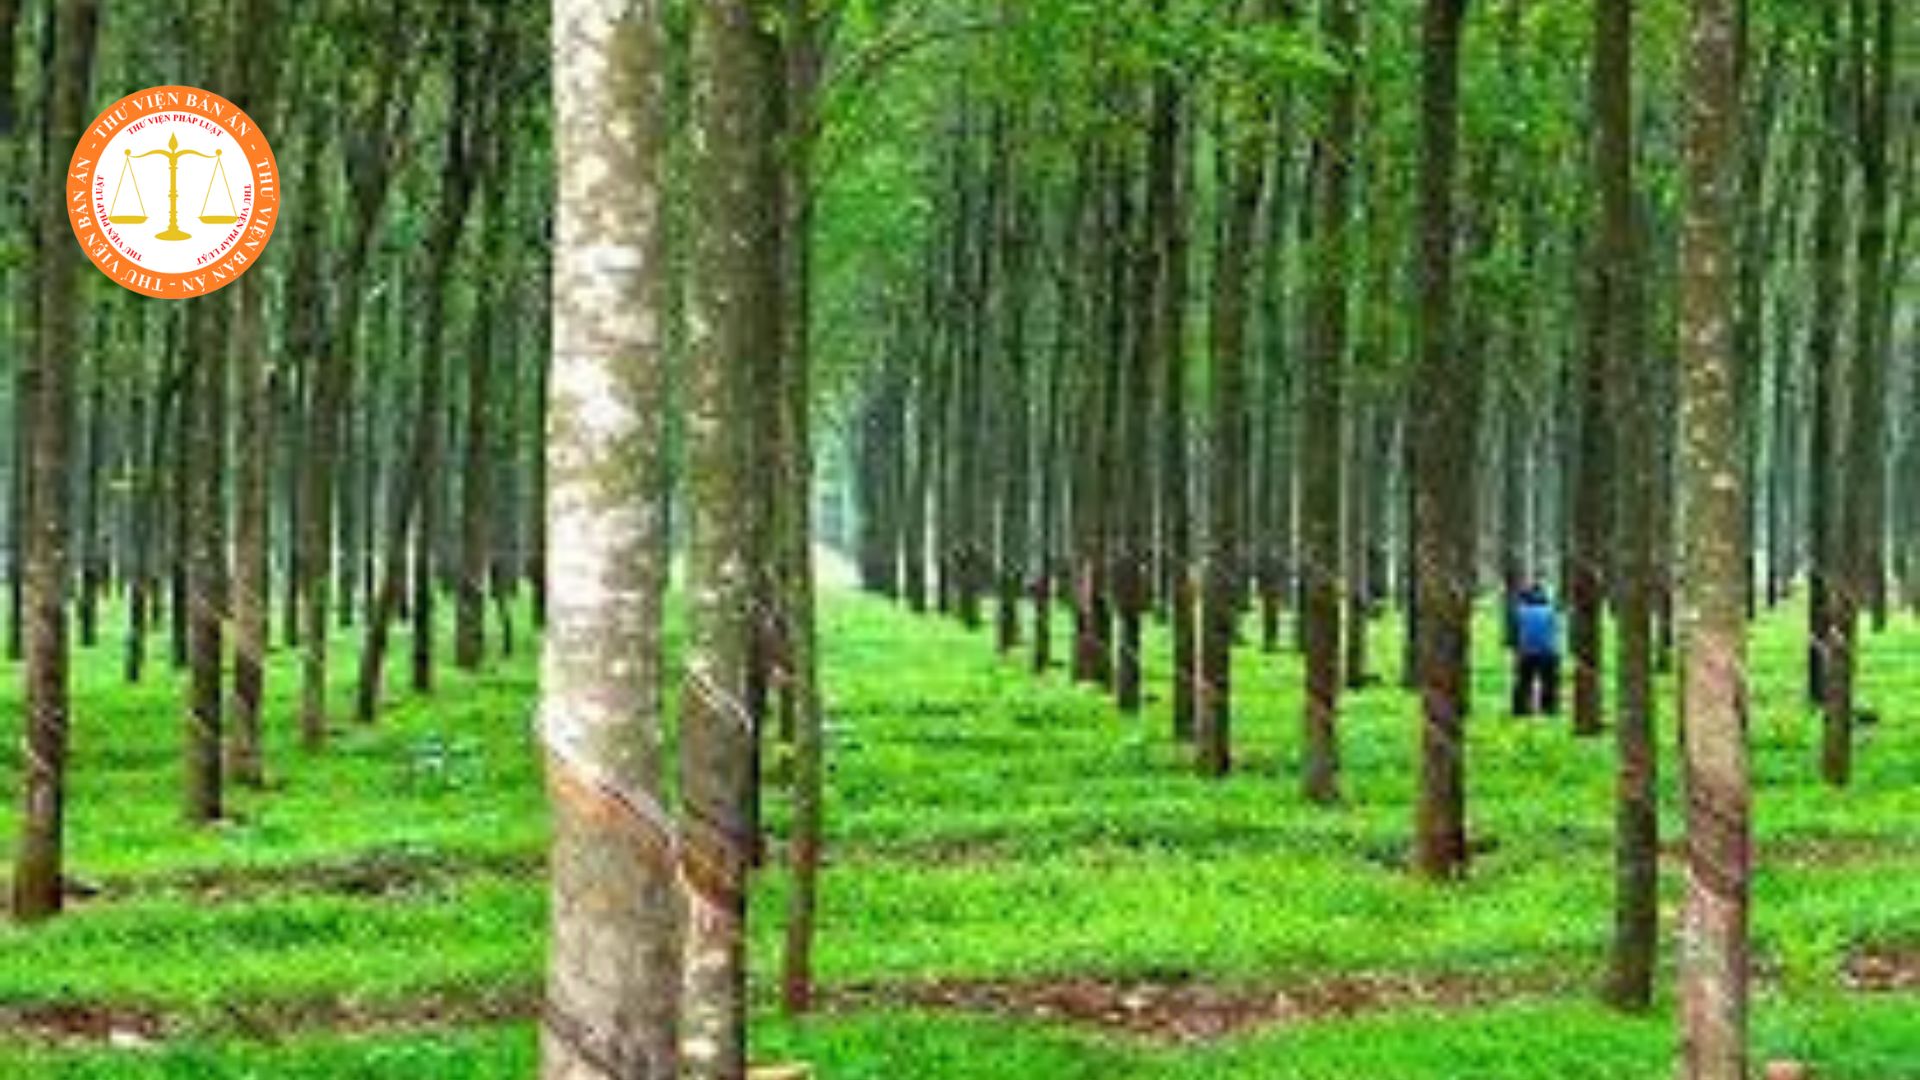 Is it legal to build barns on land for cultivation of perennial trees in Vietnam?